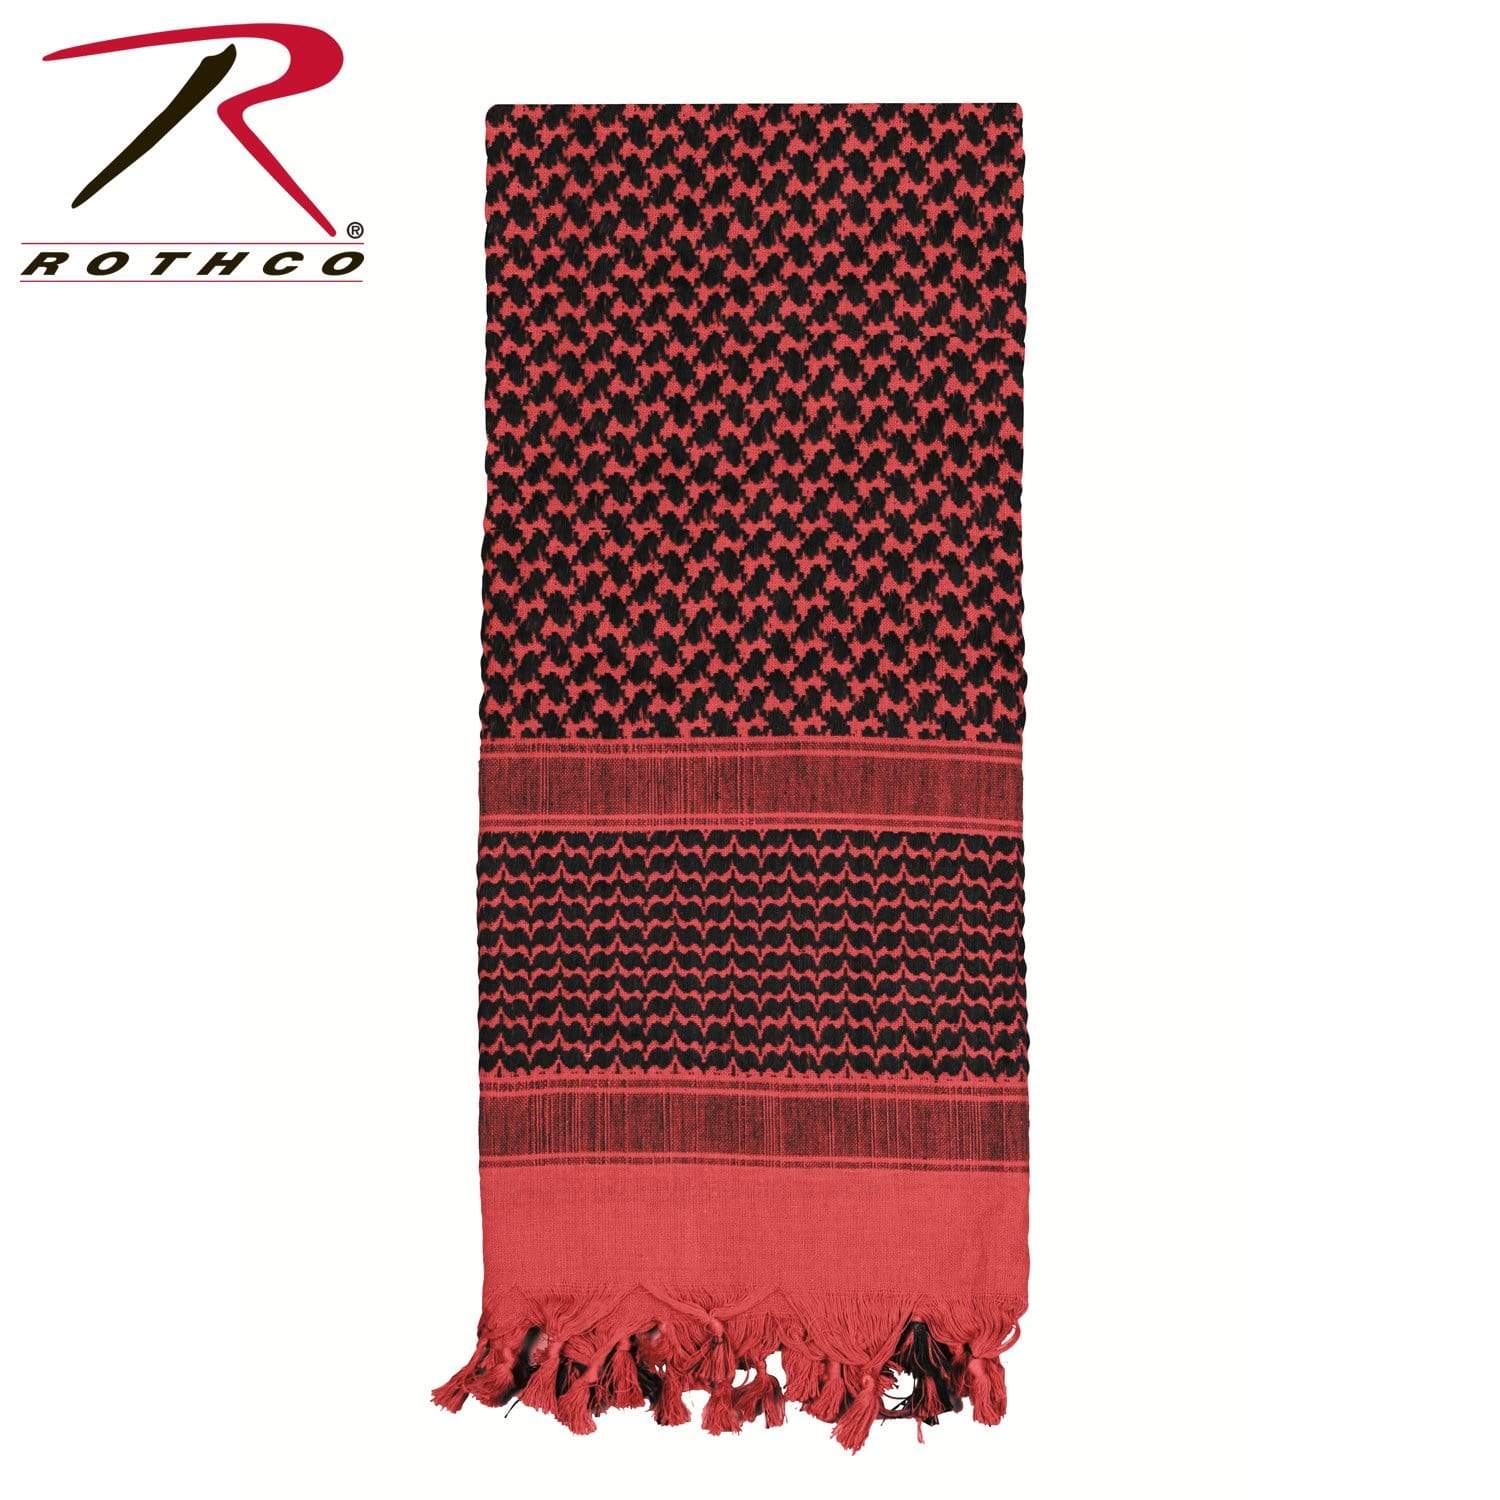 Rothco Shemagh Tactical Desert Keffiyeh Scarf - Red/Black - Eminent Paintball And Airsoft